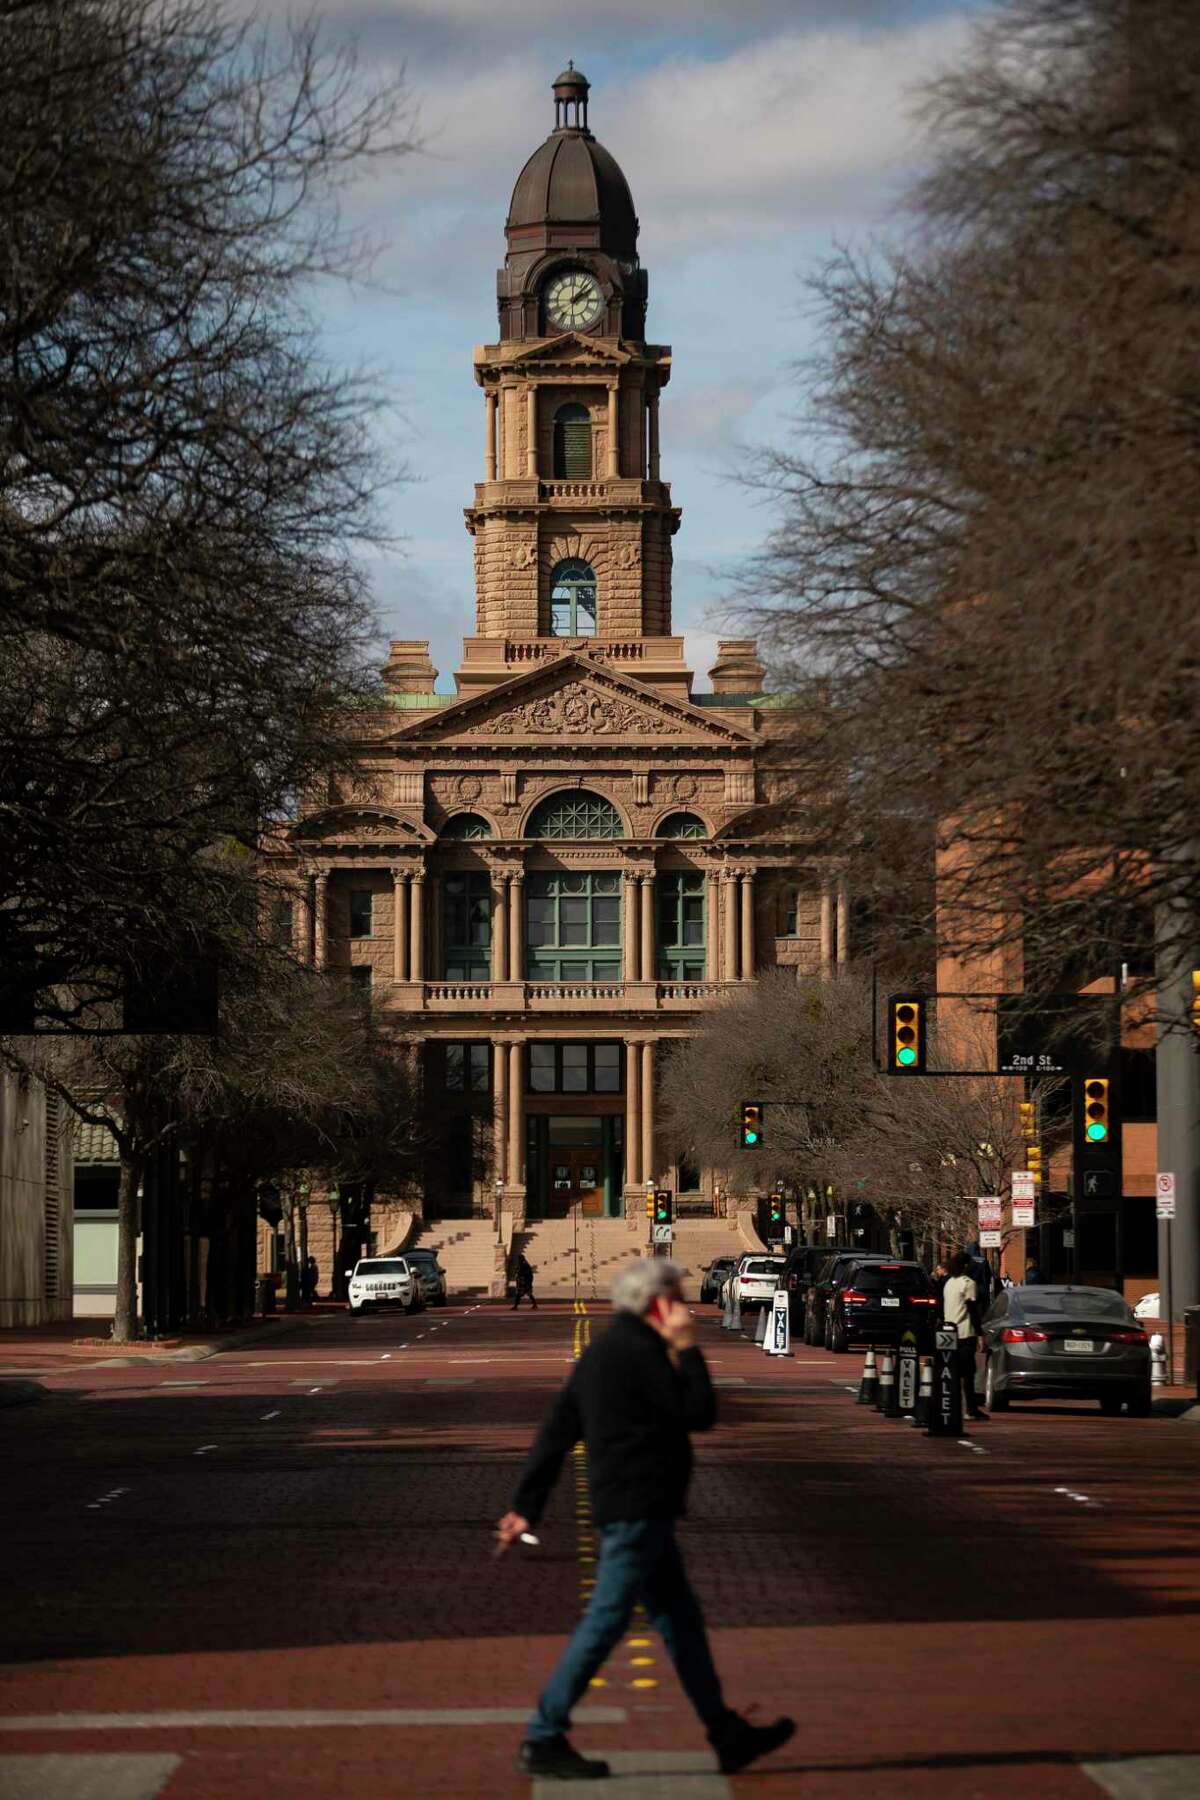 The Tarrant County courthouse in Fort Worth has seen a growing number of debt collection lawsuits filed against consumers. 